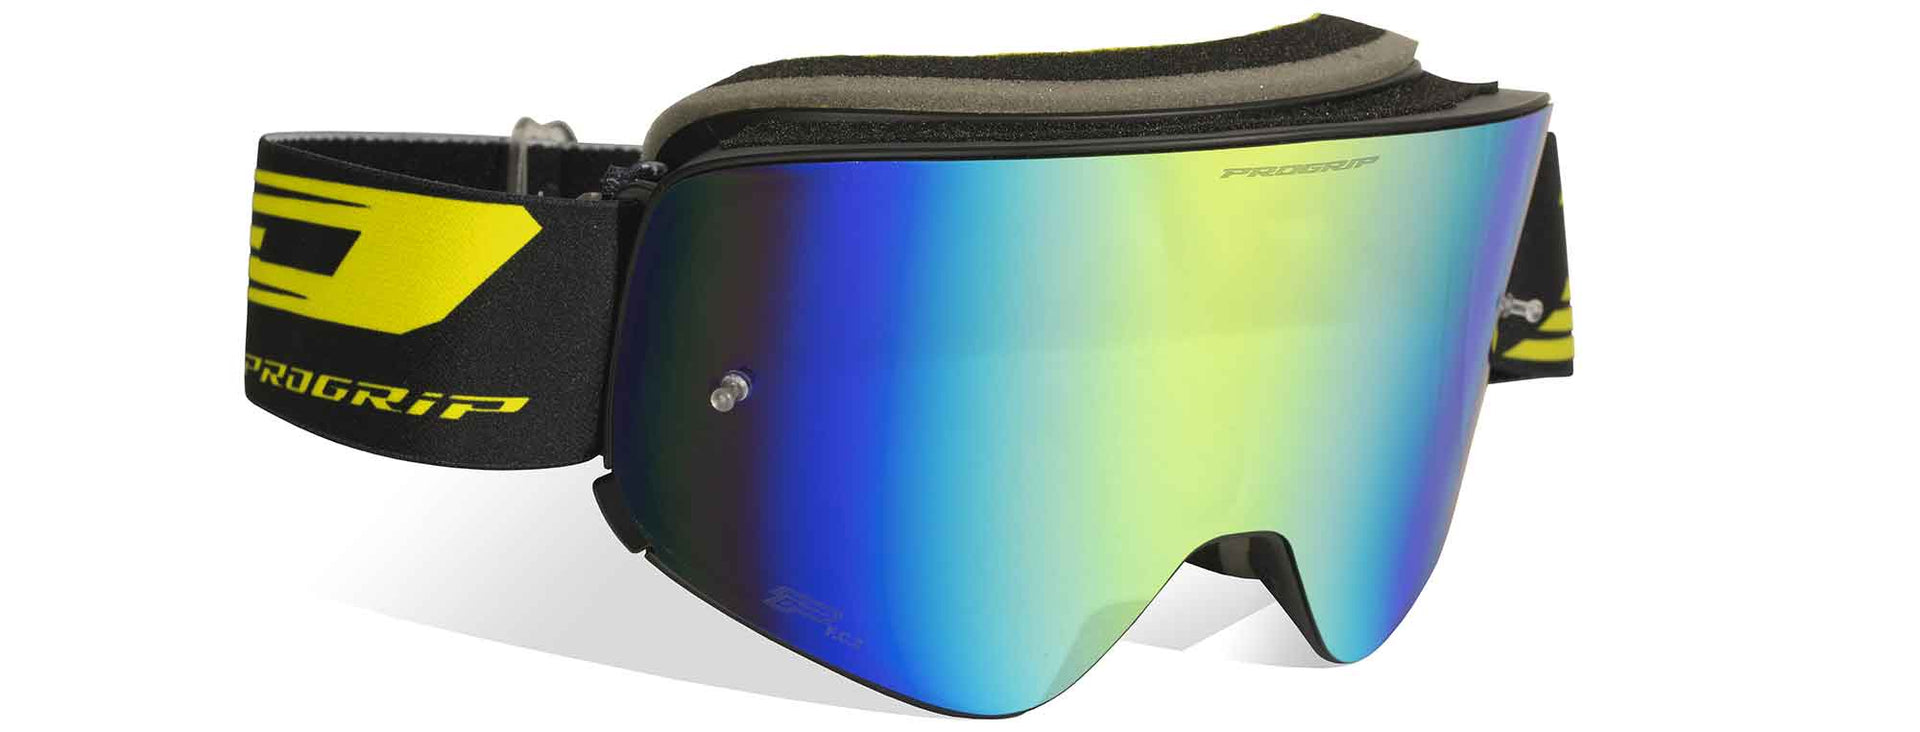 Pro Grip - Magnet Goggles